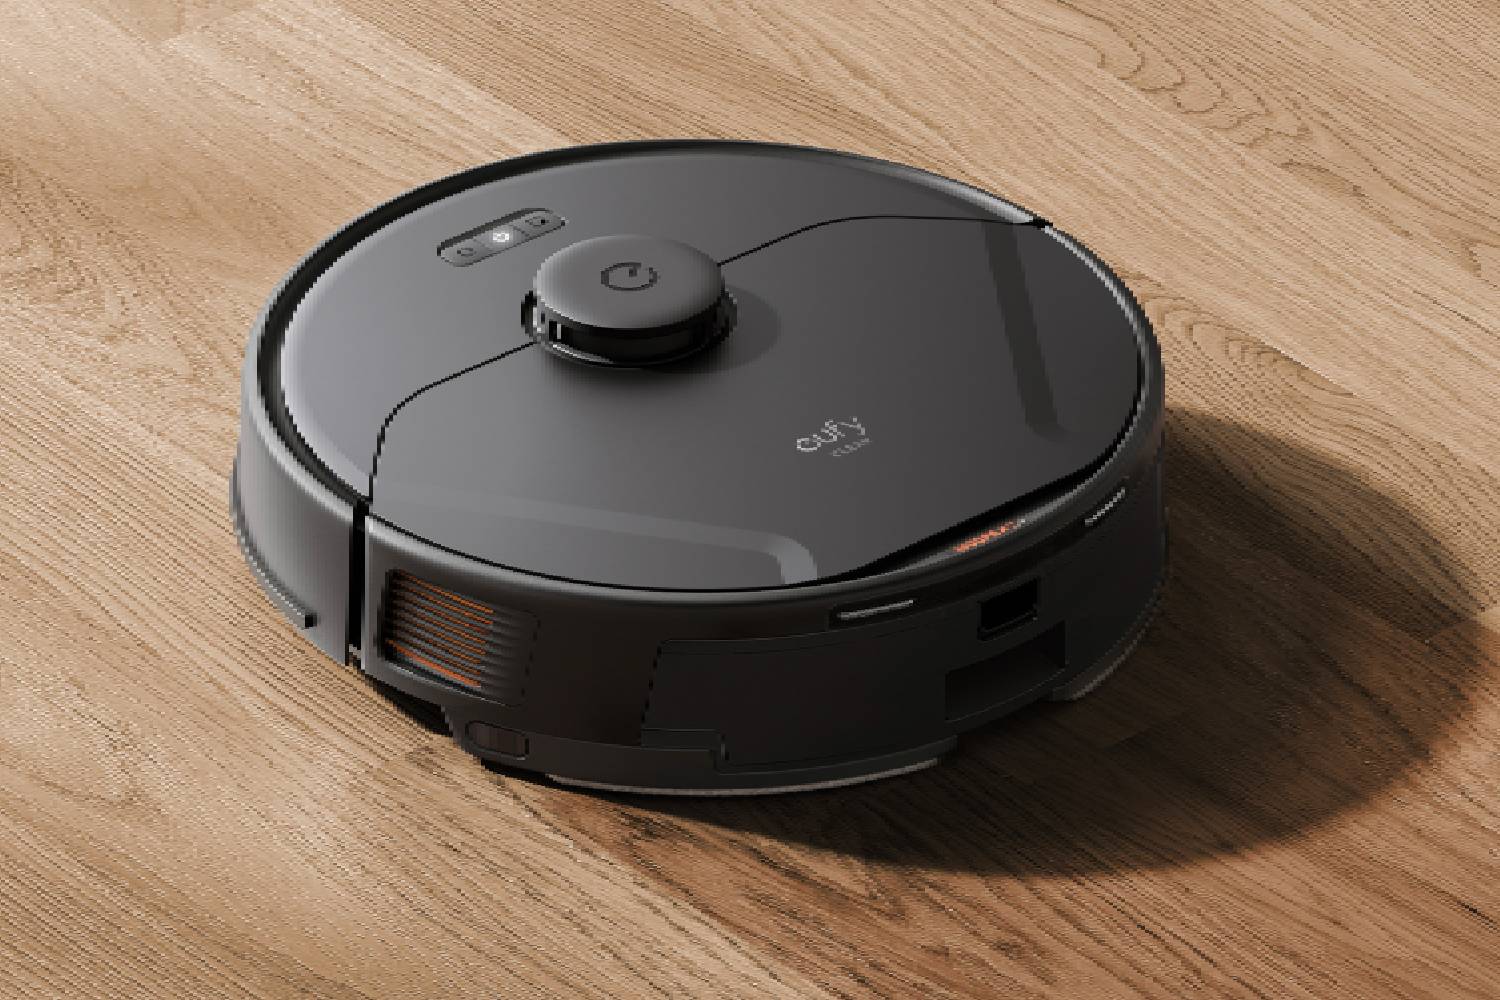 A black Eufy X8 Pro robot vacuum cleaner on a wooden floor.